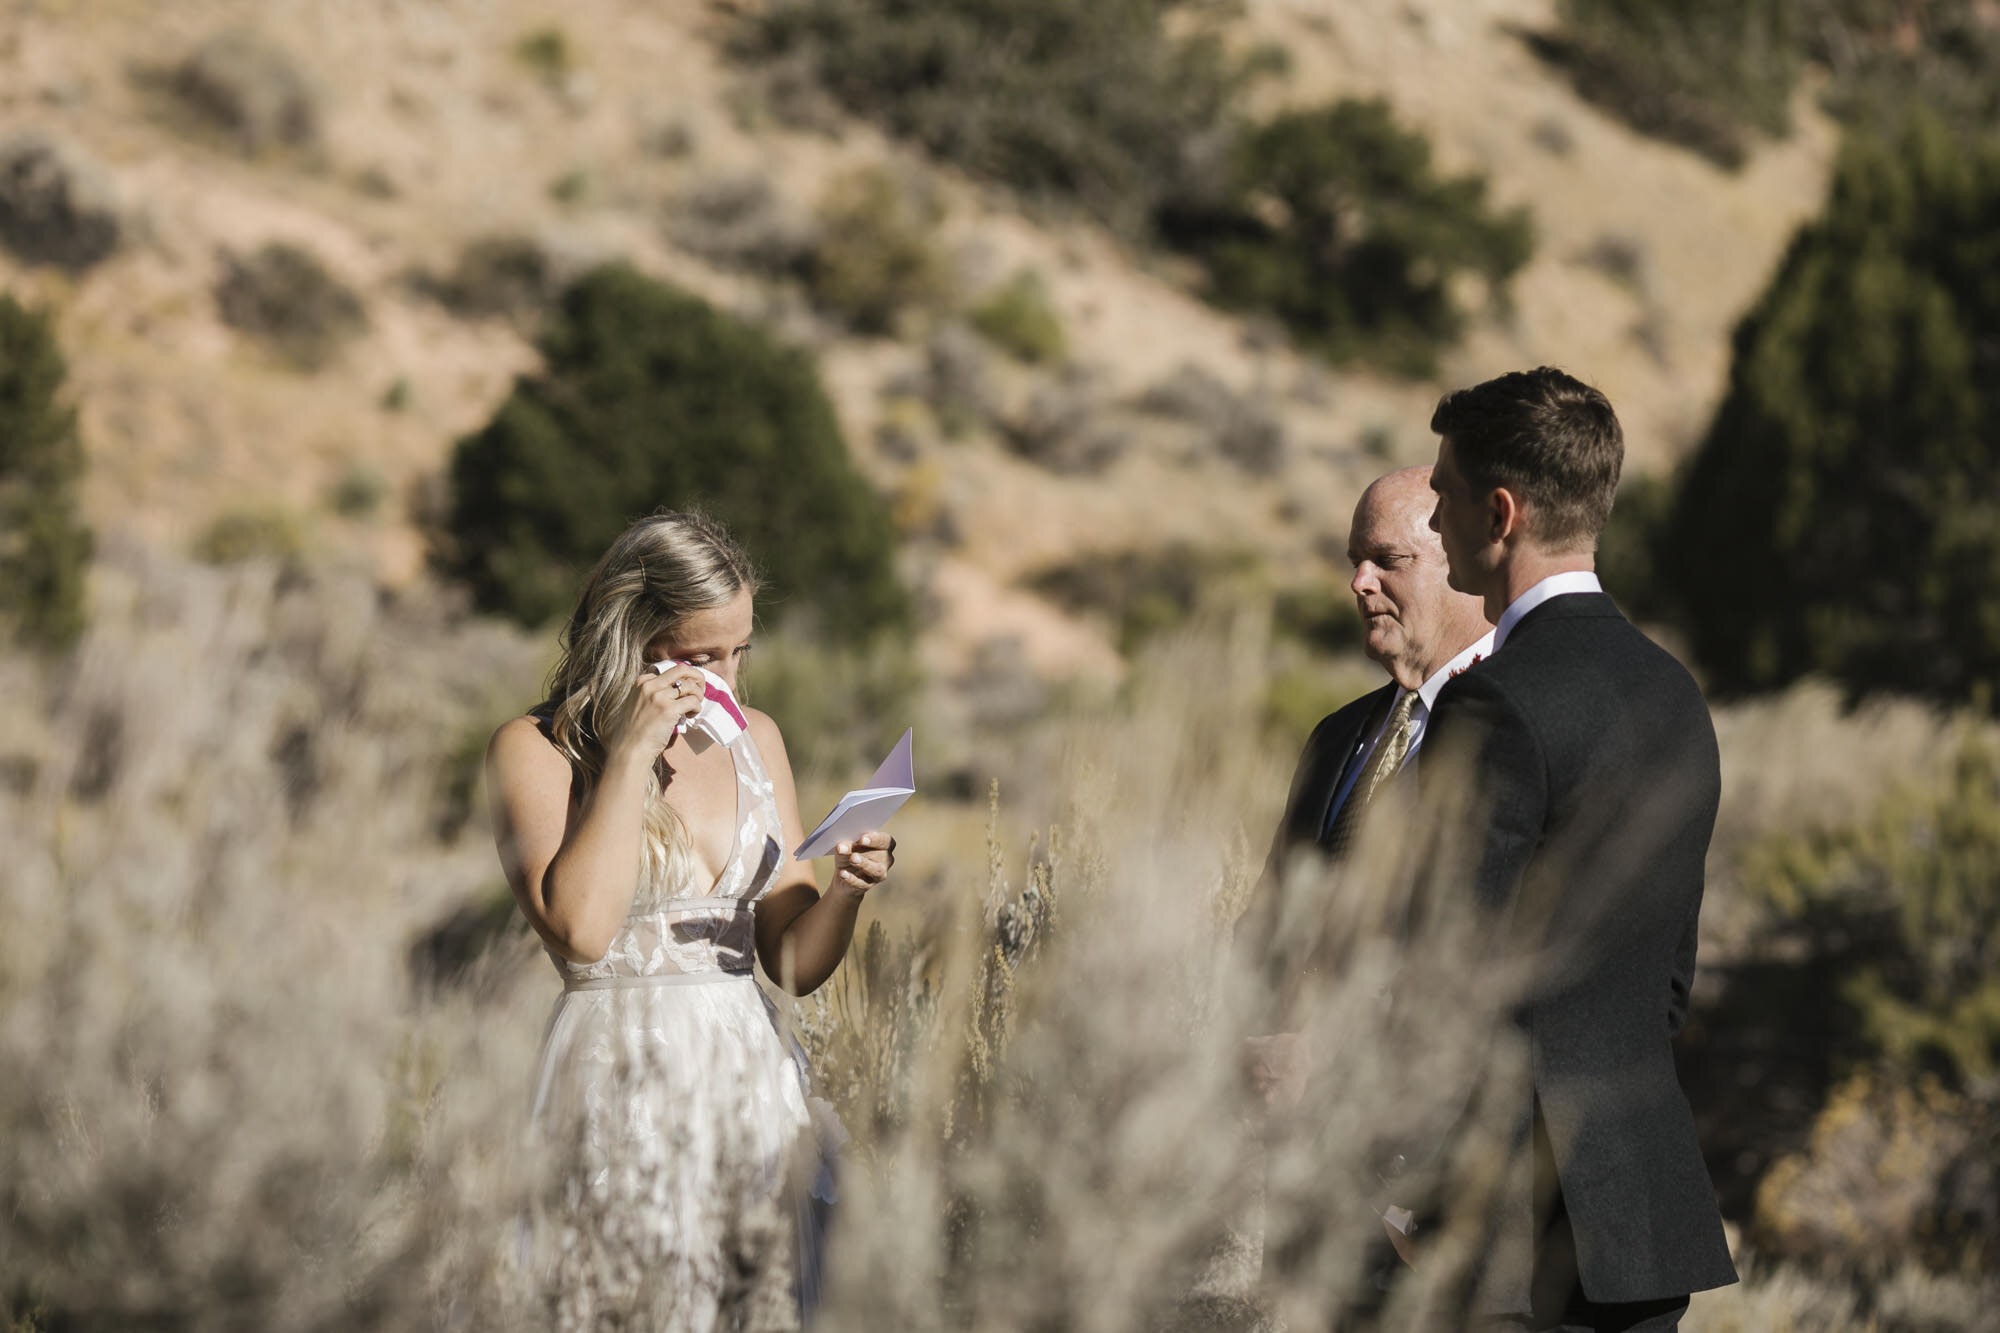 Bride wipes her eyes while exchanging vows during her wedding ceremony in the Utah desert